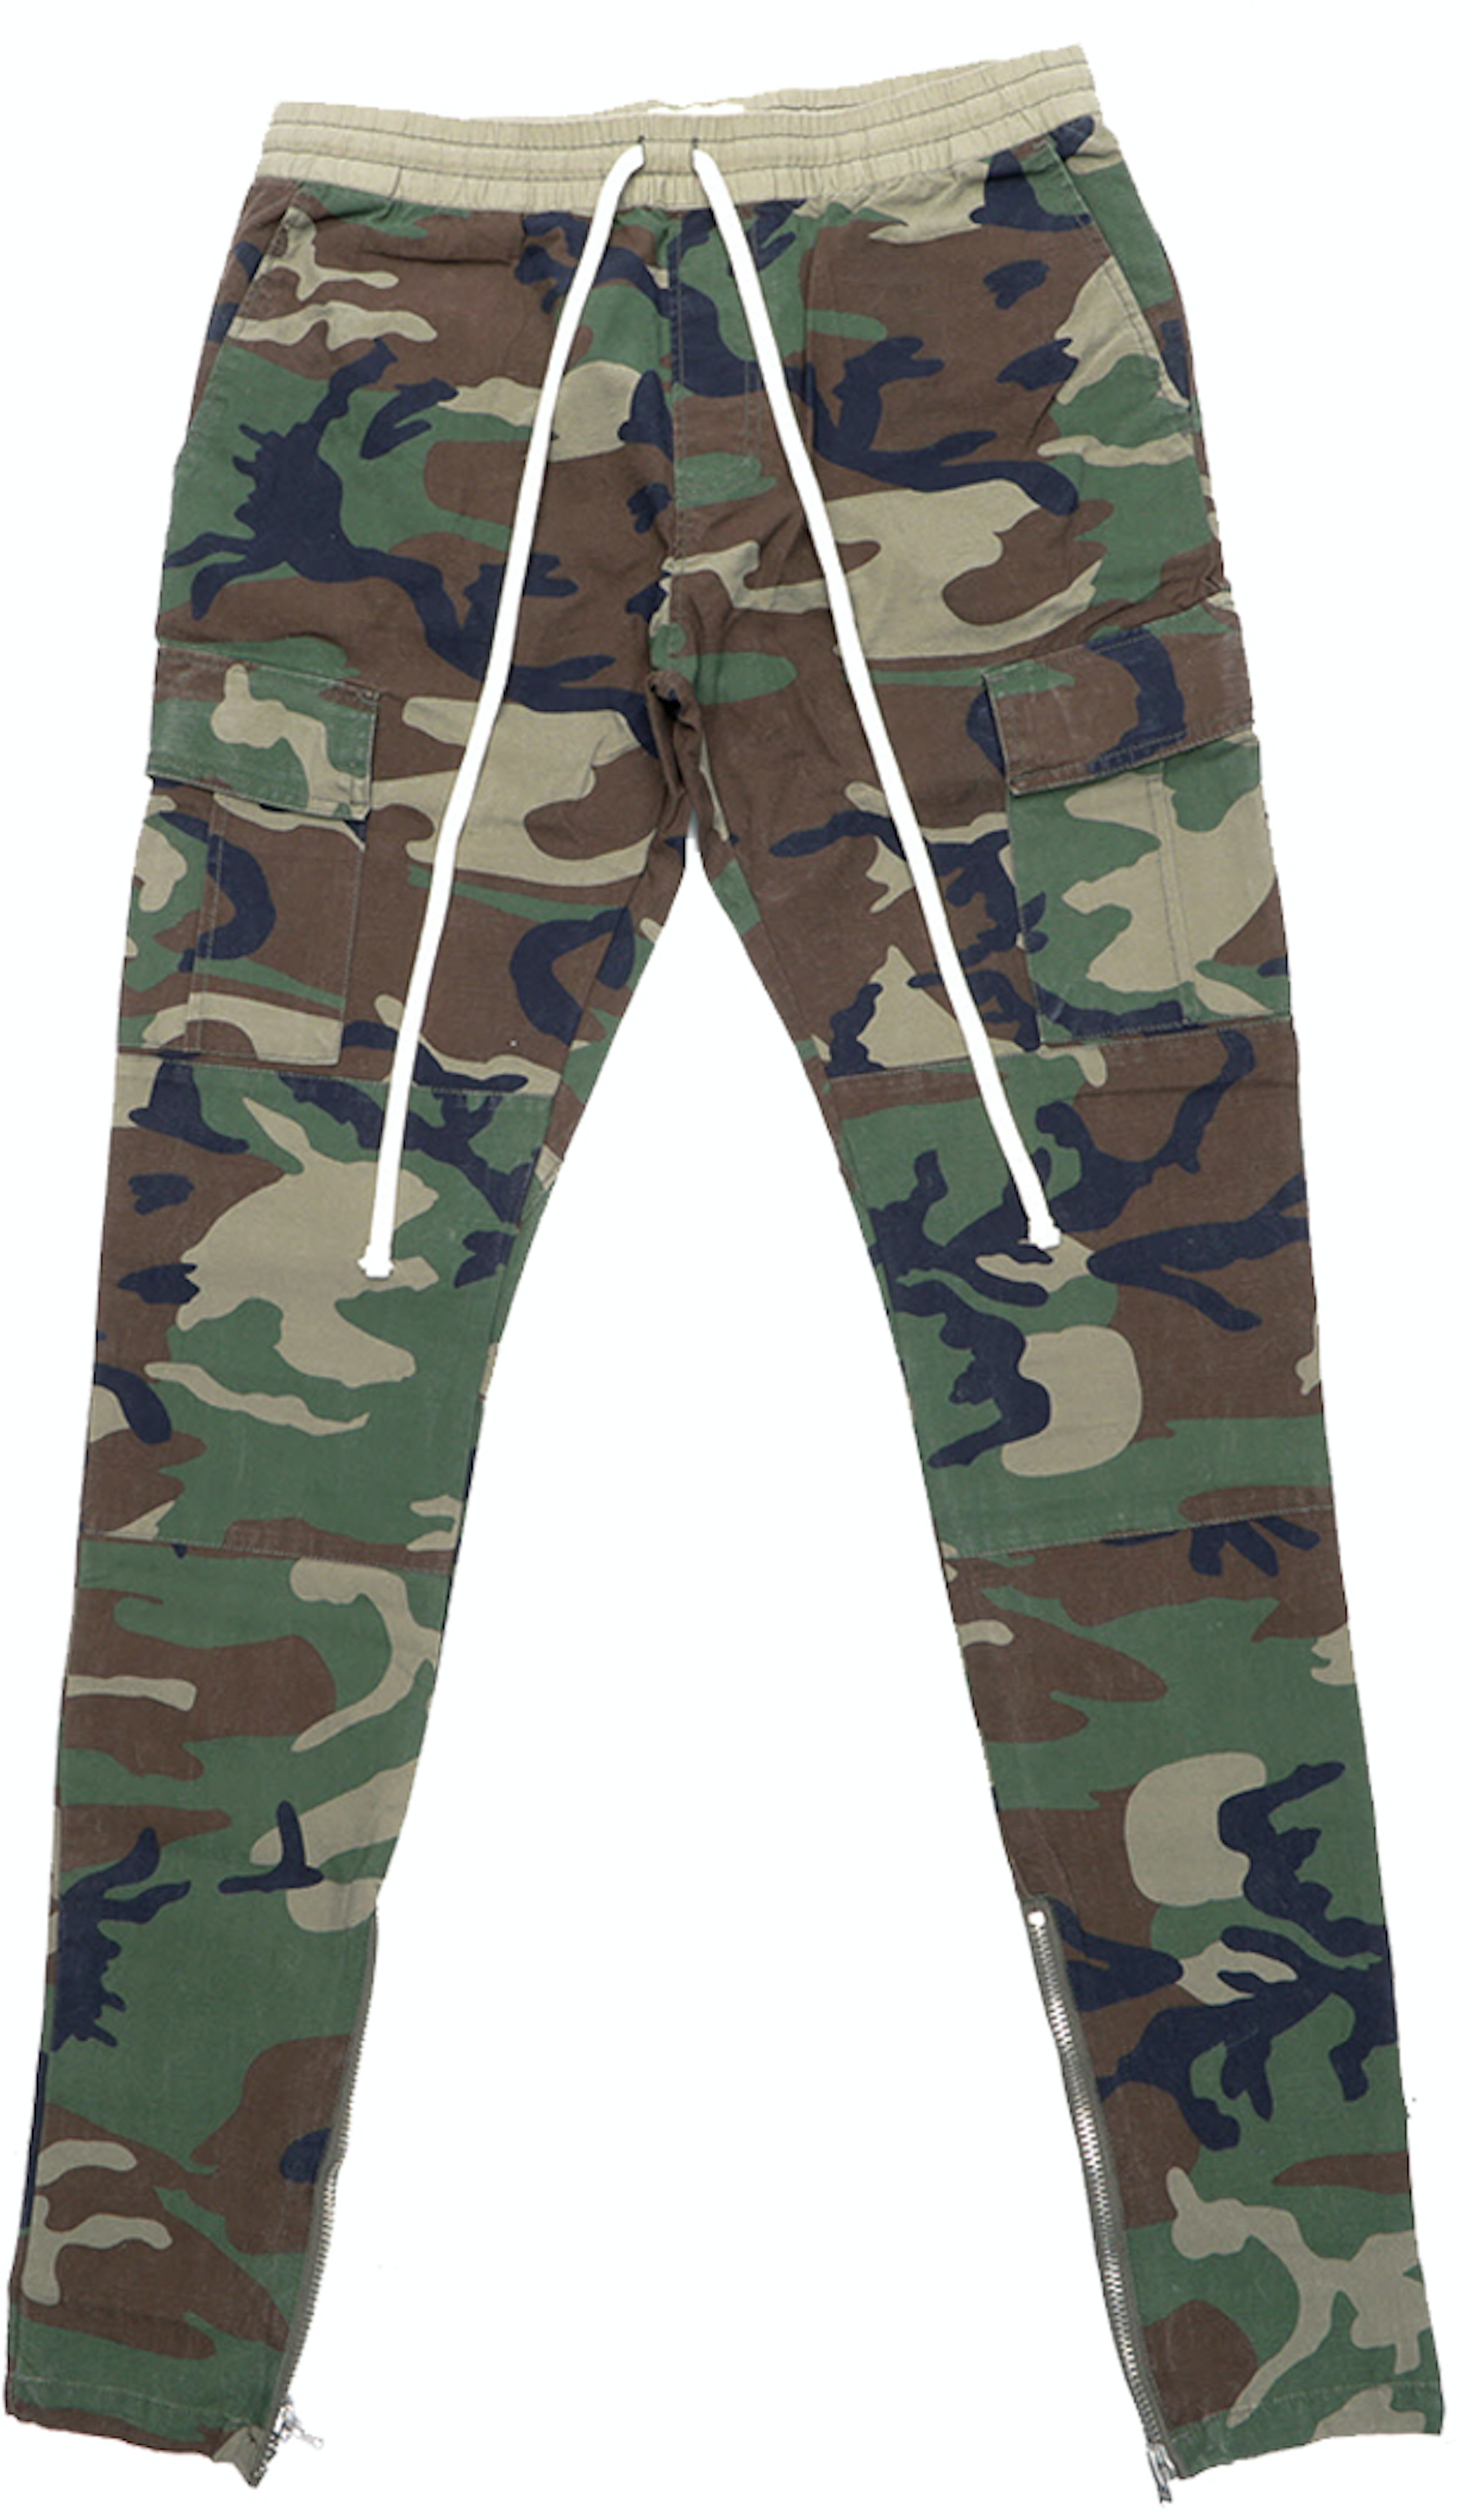 FEAR OF GOD FOG Camouflage Drawstring Cargo Pants Camo - Collection One